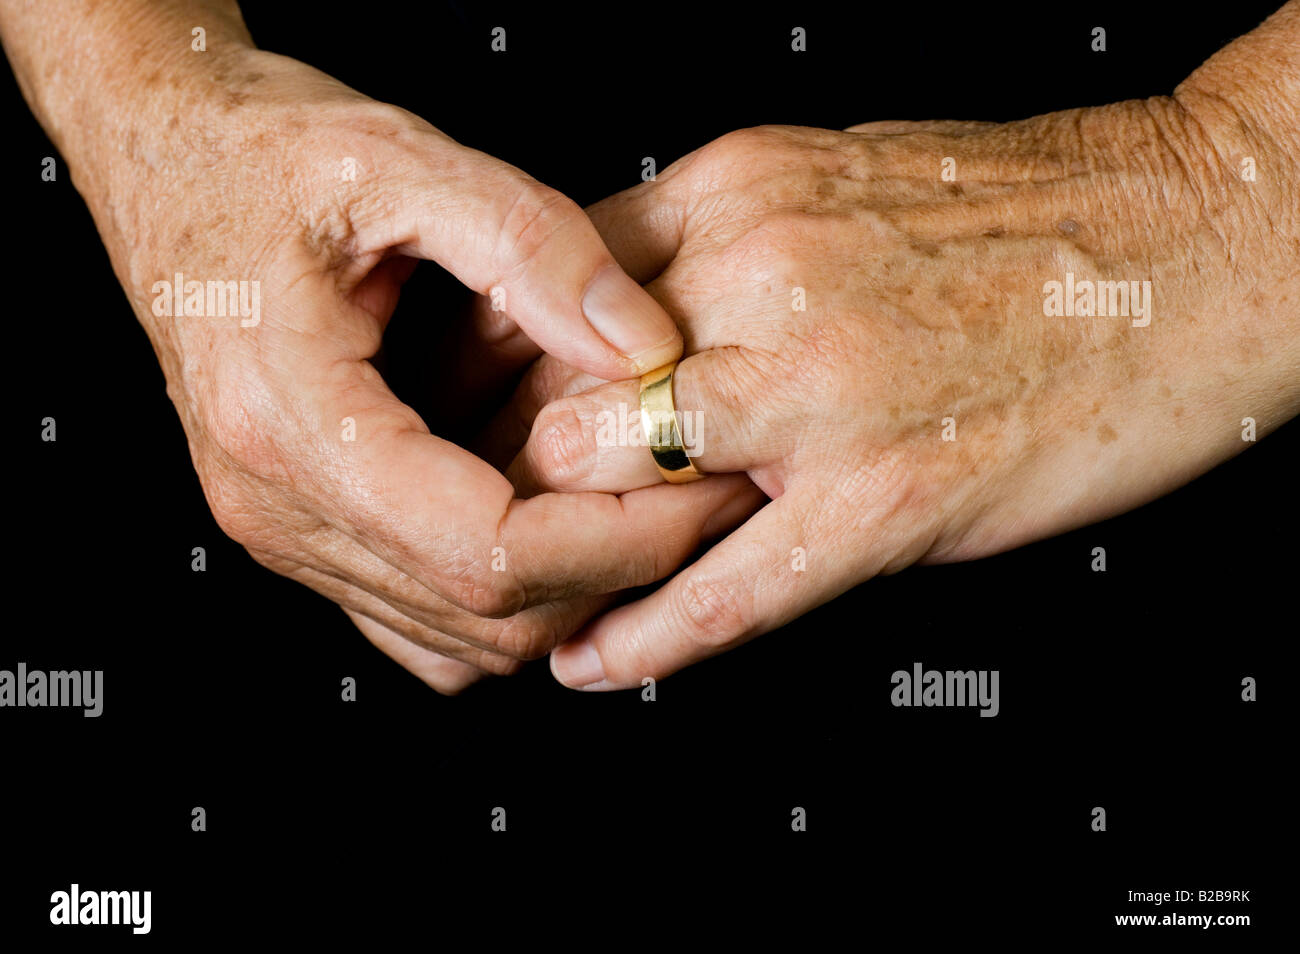 A man's hand with a wedding ring holds a woman's hand. 21683536 Stock Photo  at Vecteezy